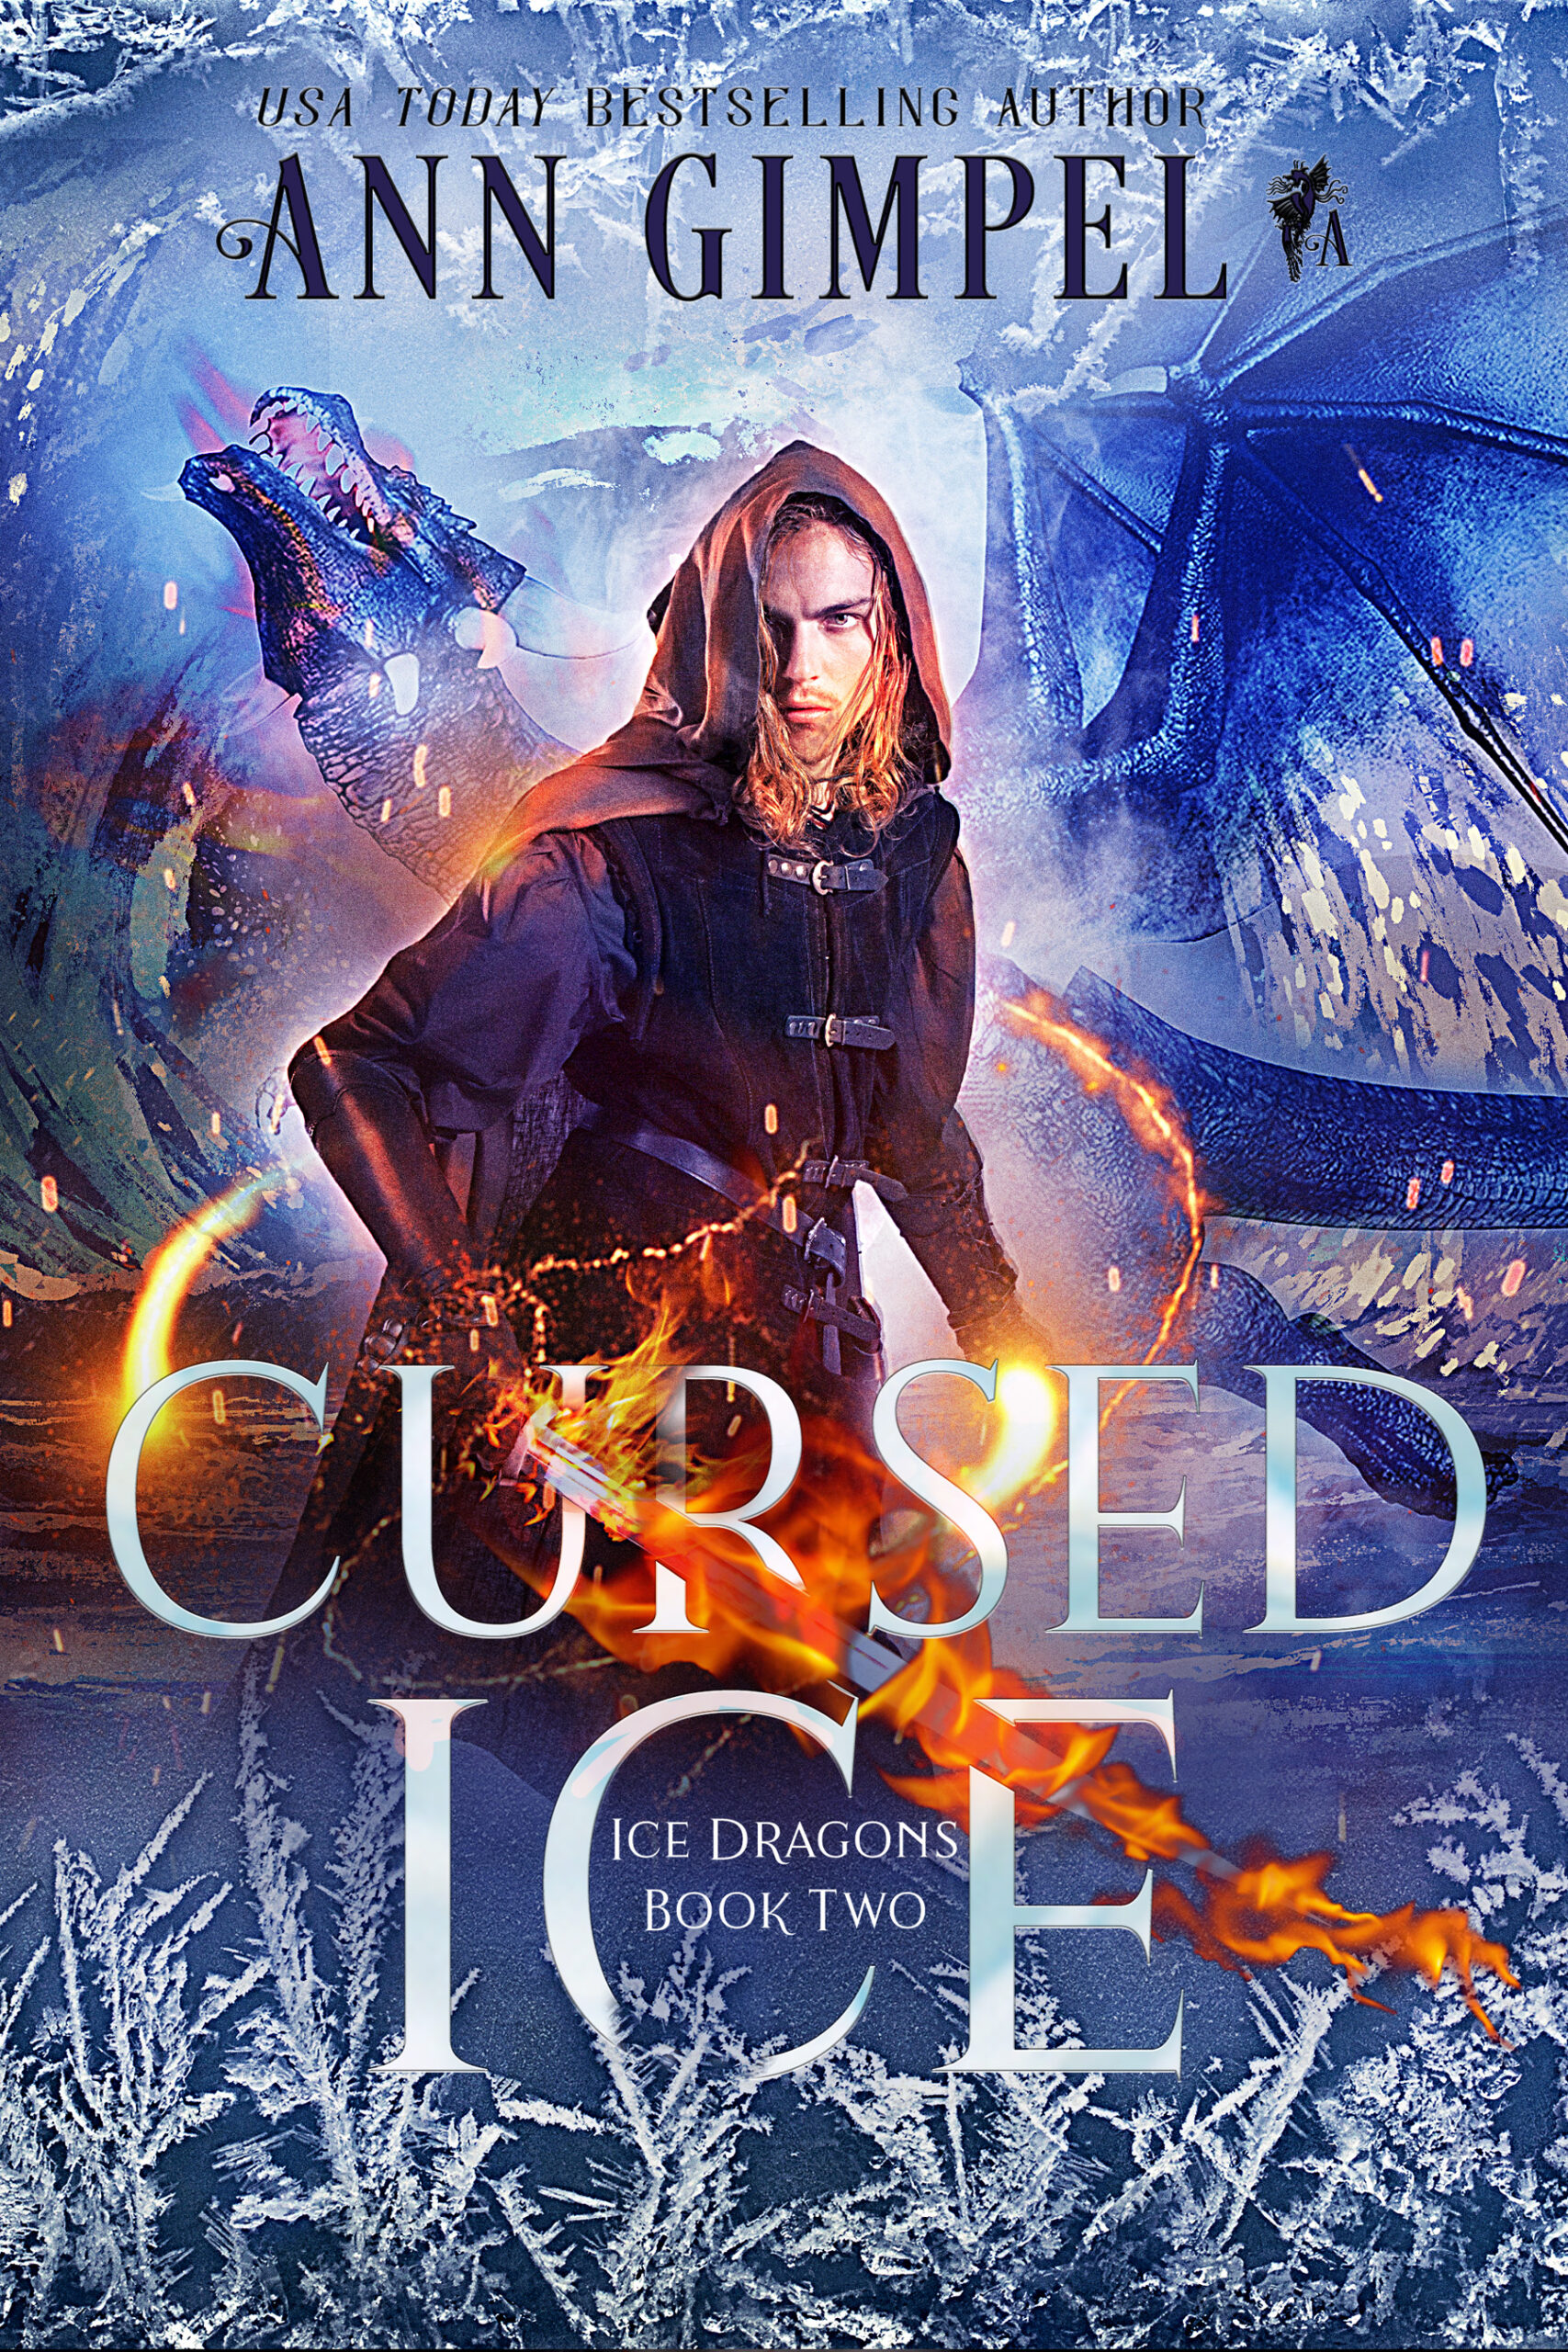 Cursed Ice, Ice Dragons Book Two